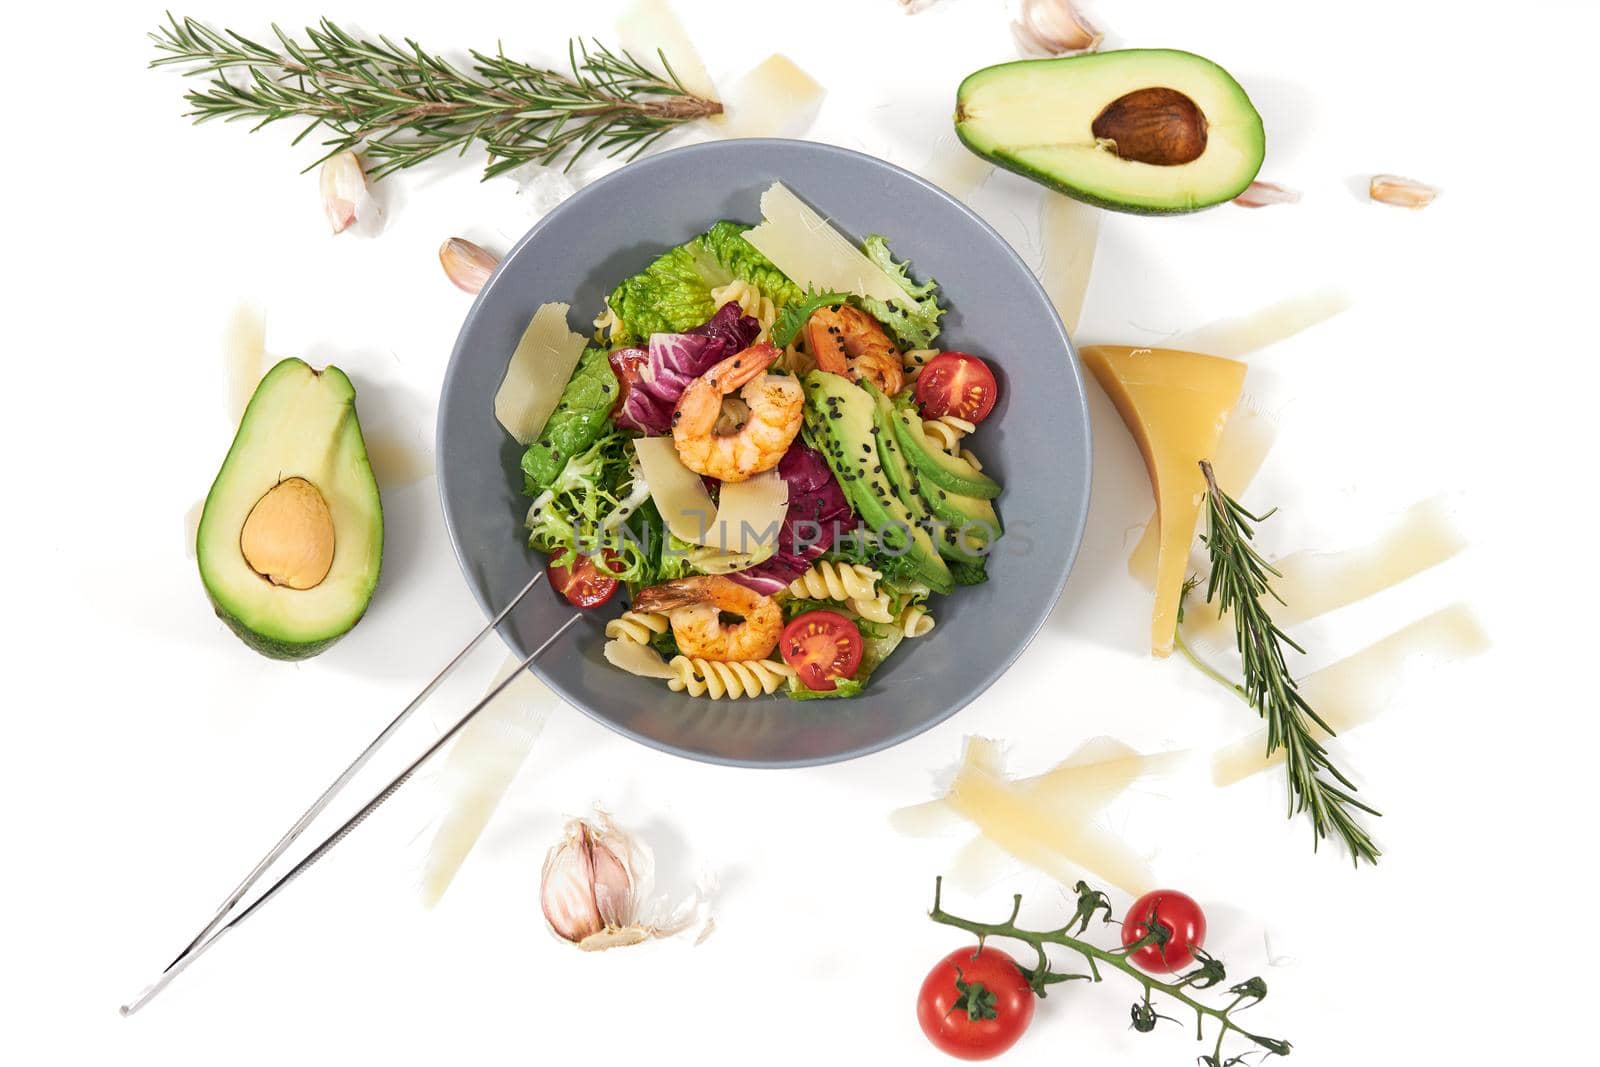 Top view of modern blue bowl with pasta,seafood,avocado,tomatoes and fresh leaf greens on white background. Concept of beautiful composition with vegetables and tasty cheese and herbs. 